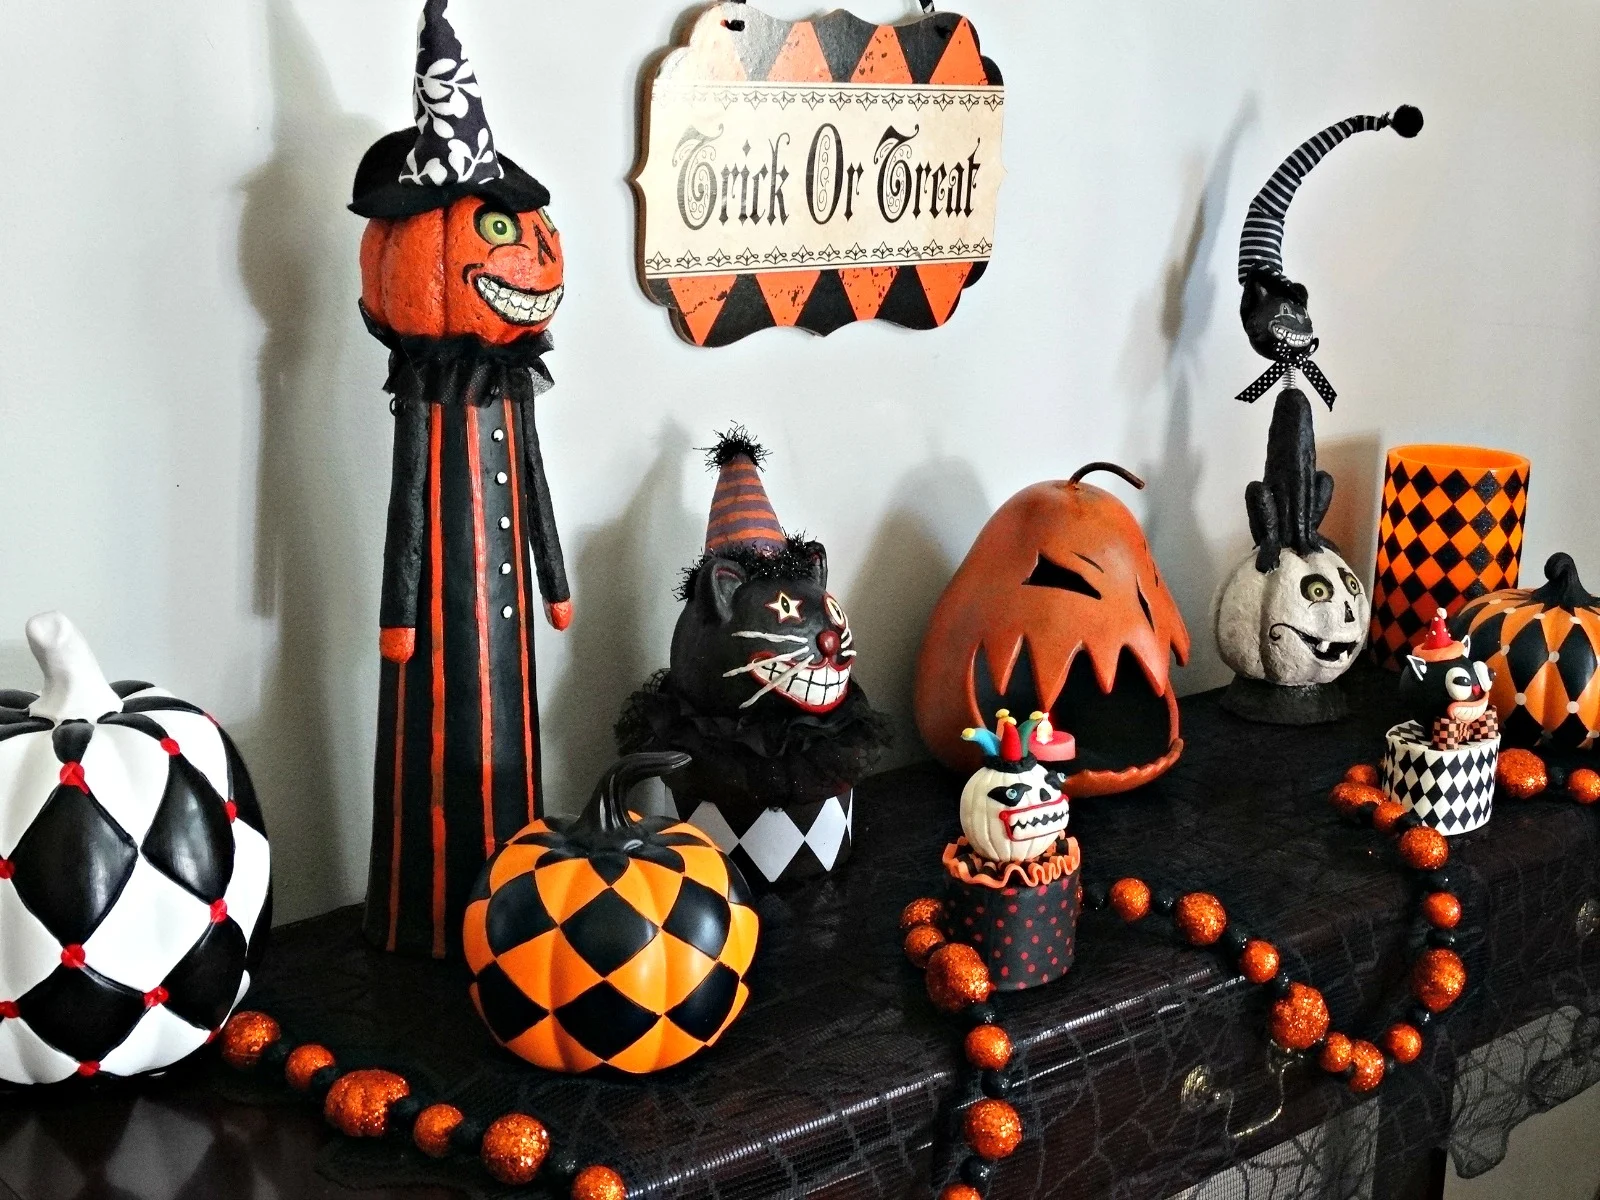 A Halloween Haunted Harlequin tablescape makes great decor for Halloween dinner party ideas